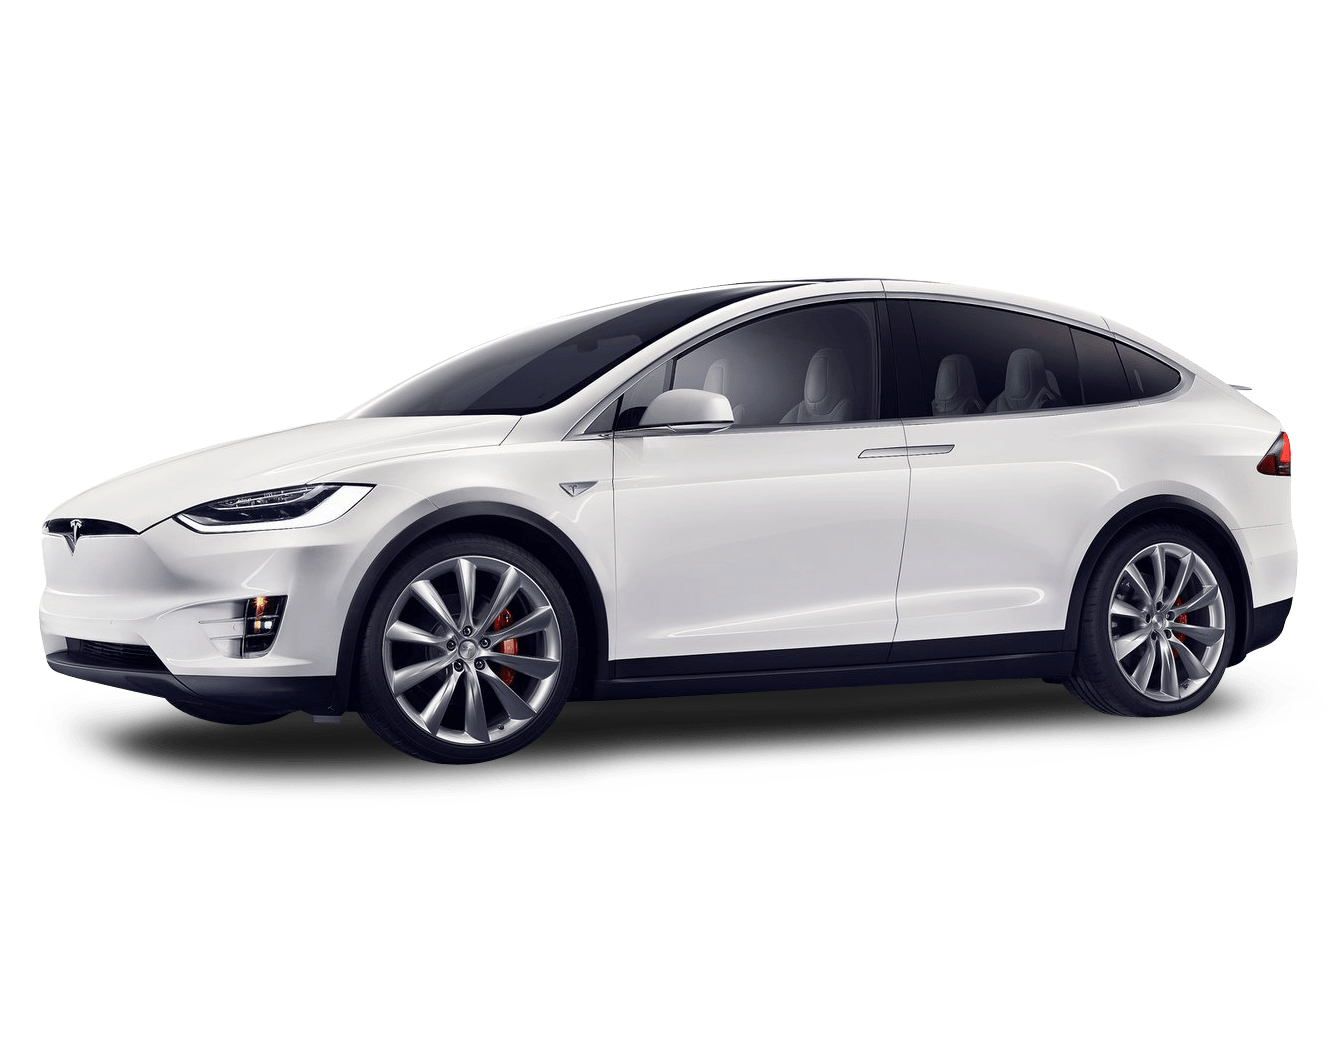 Tesla Model X Review Colours For Sale Models News In Australia Carsguide